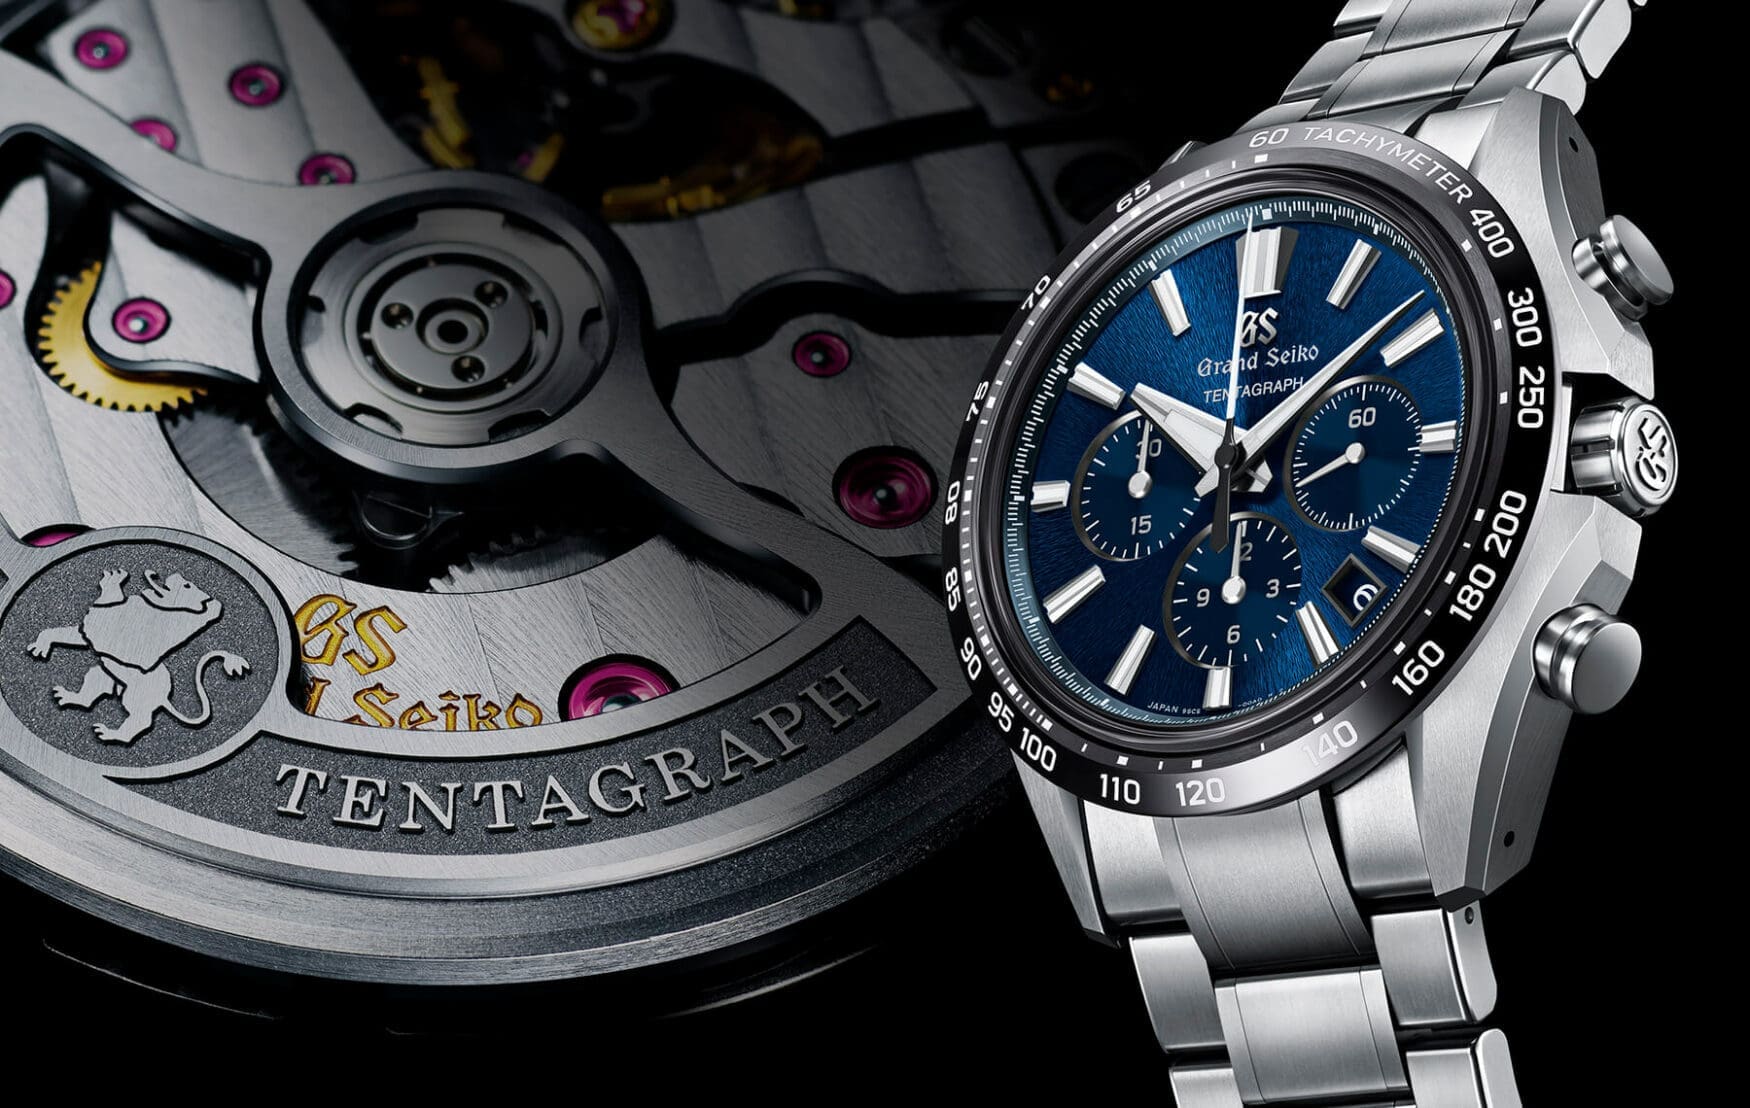 The Grand Seiko Tentagraph SLGC001 – the first fully mechanical chronograph movement from GS